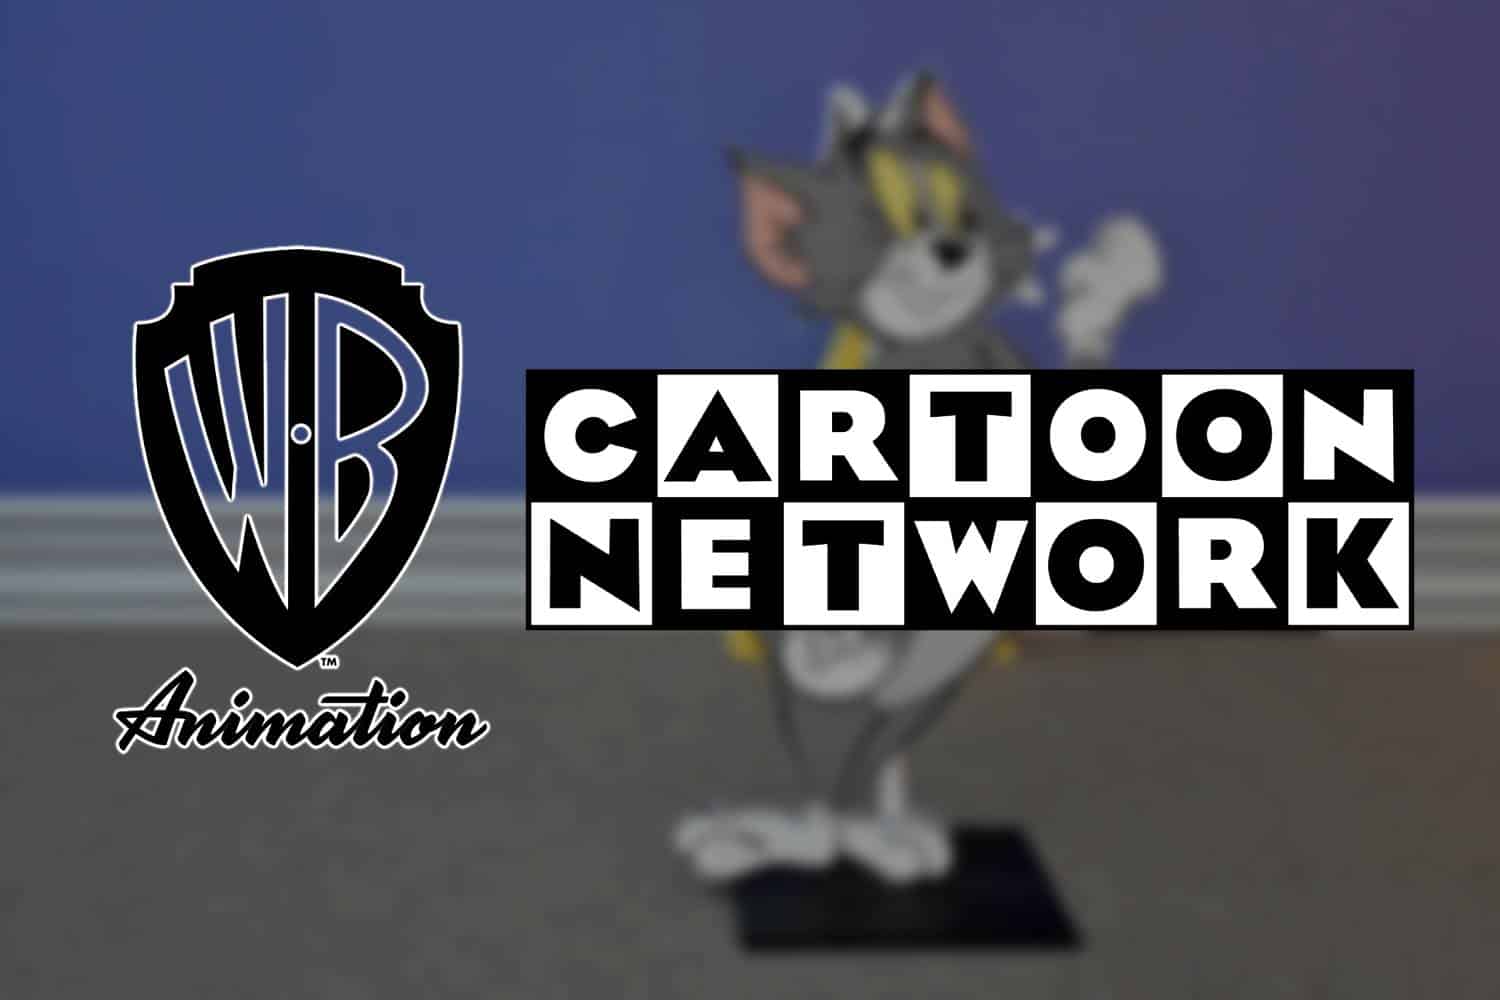 Here's what you must know about the Cartoon Network, Warner Bros Animation  merger - Swisher Post